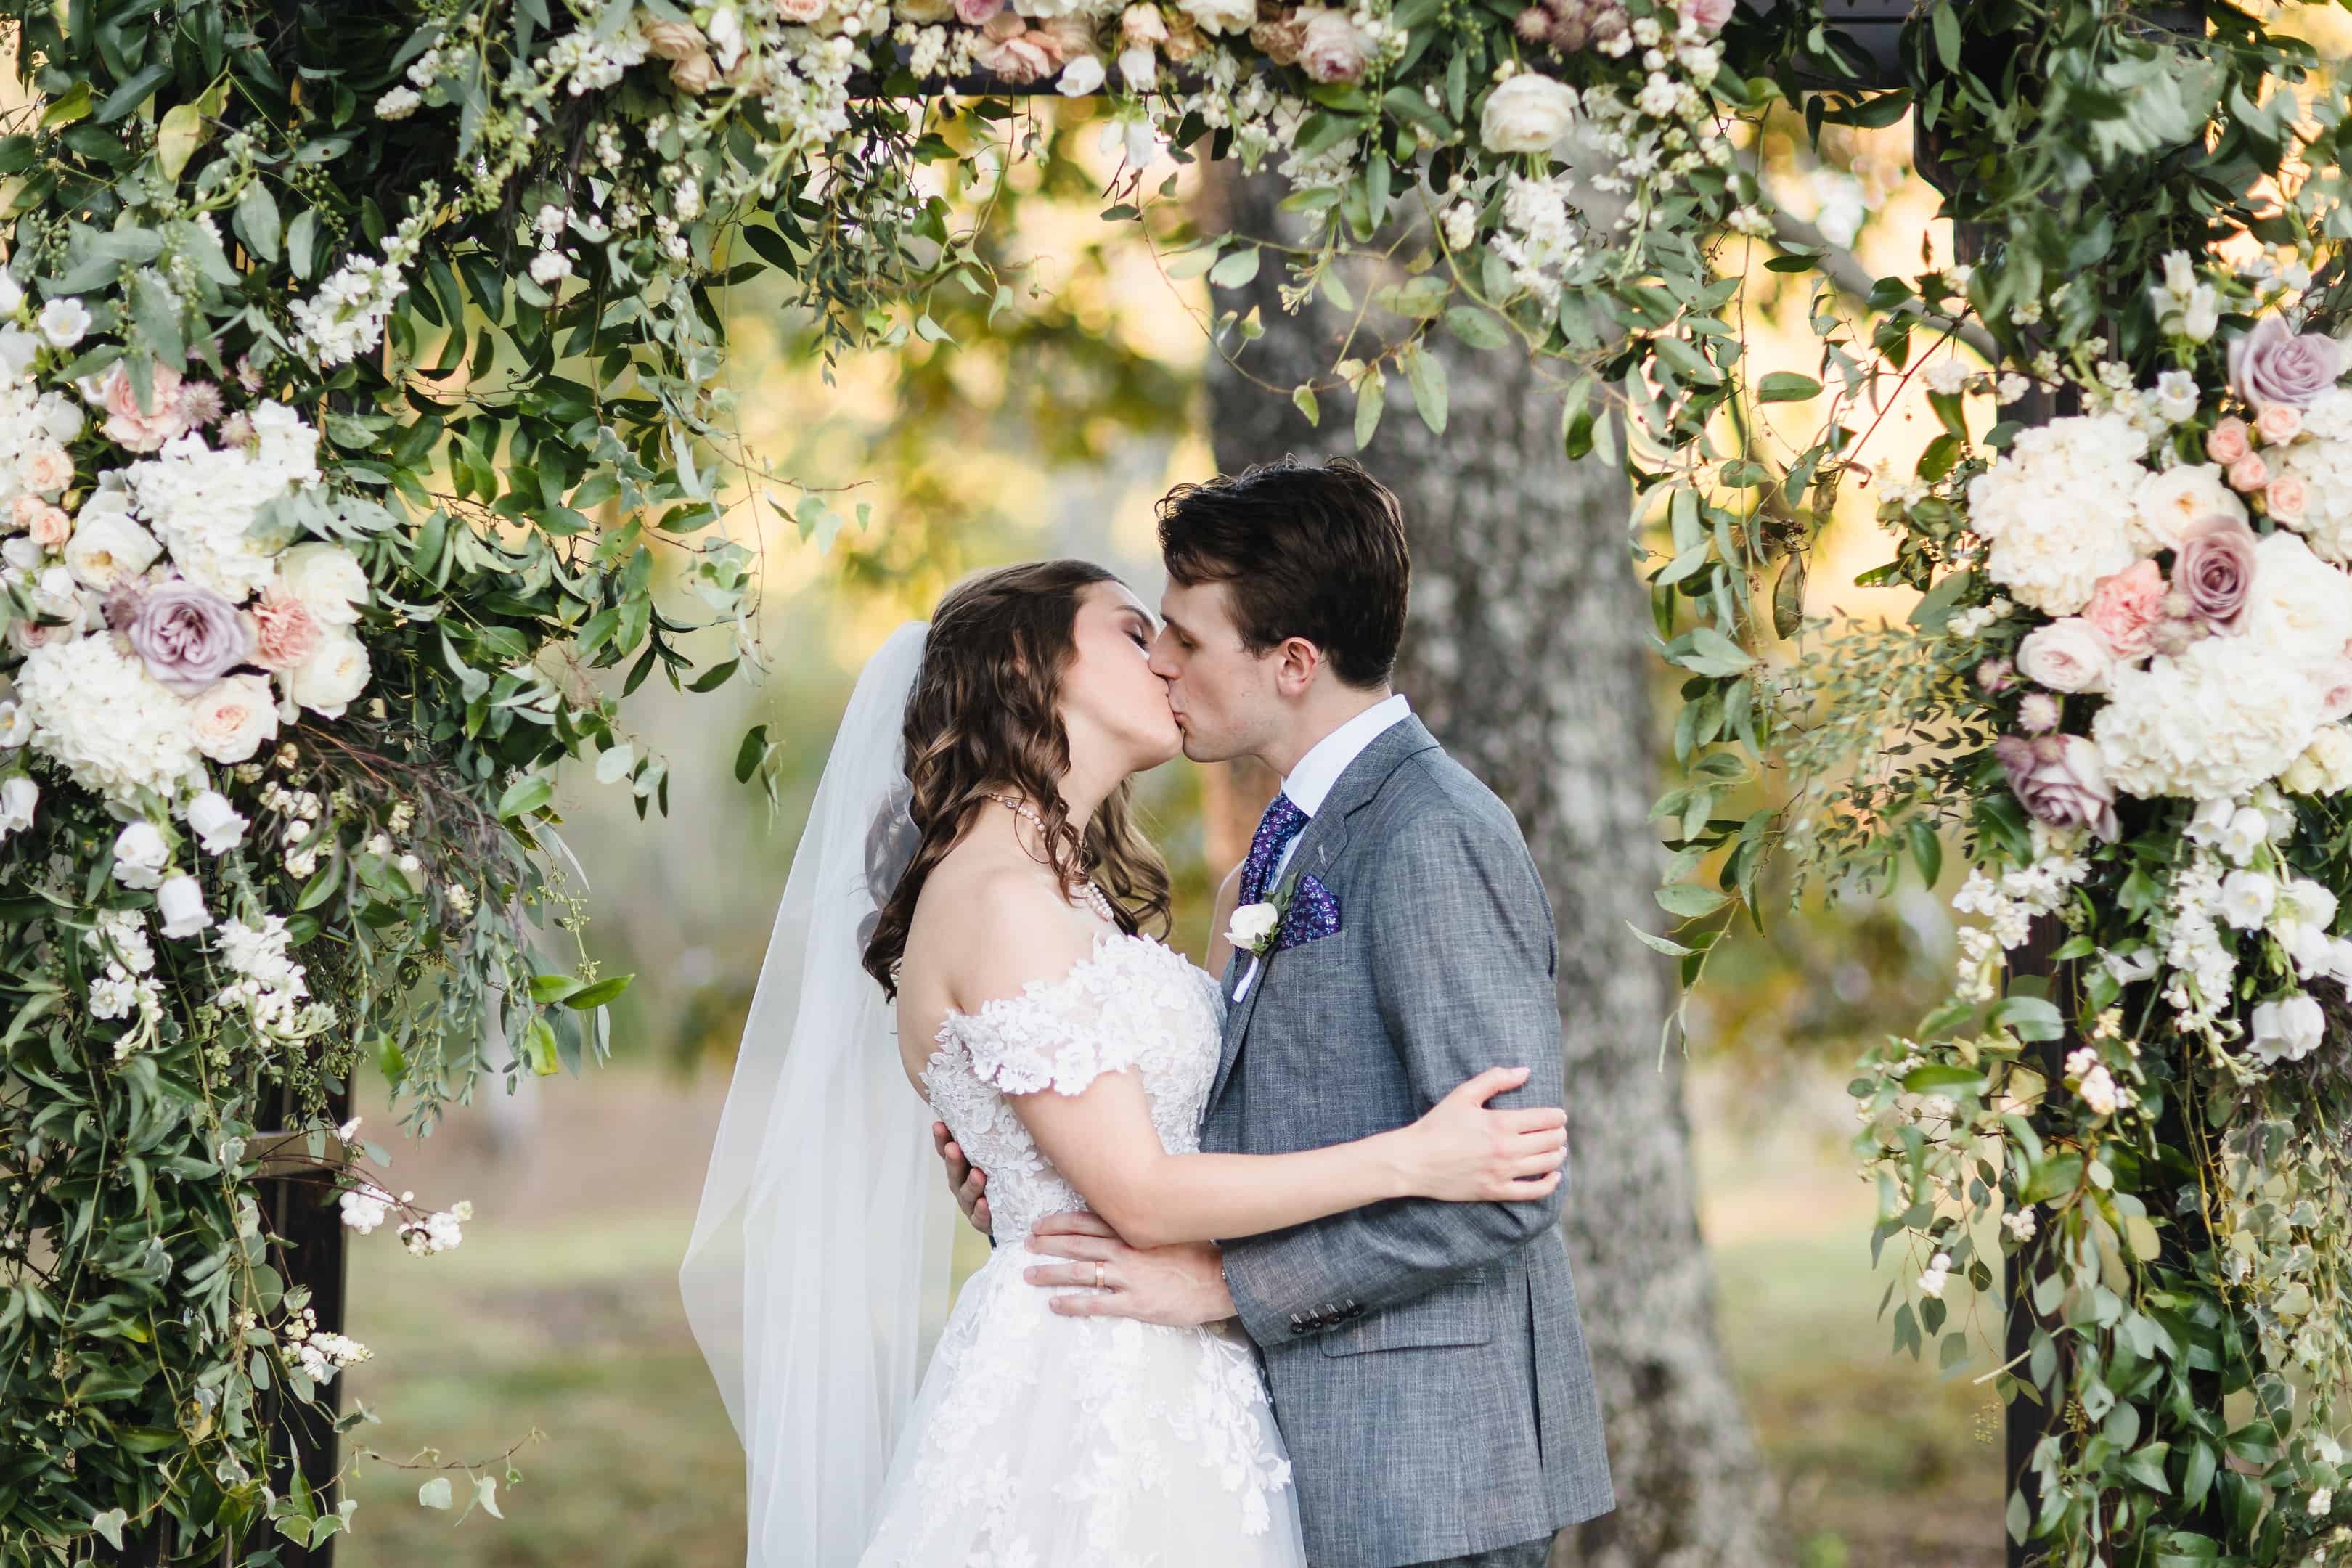 Bella & Riley - Upscale Backyard Wedding in McMinnville, Tennessee